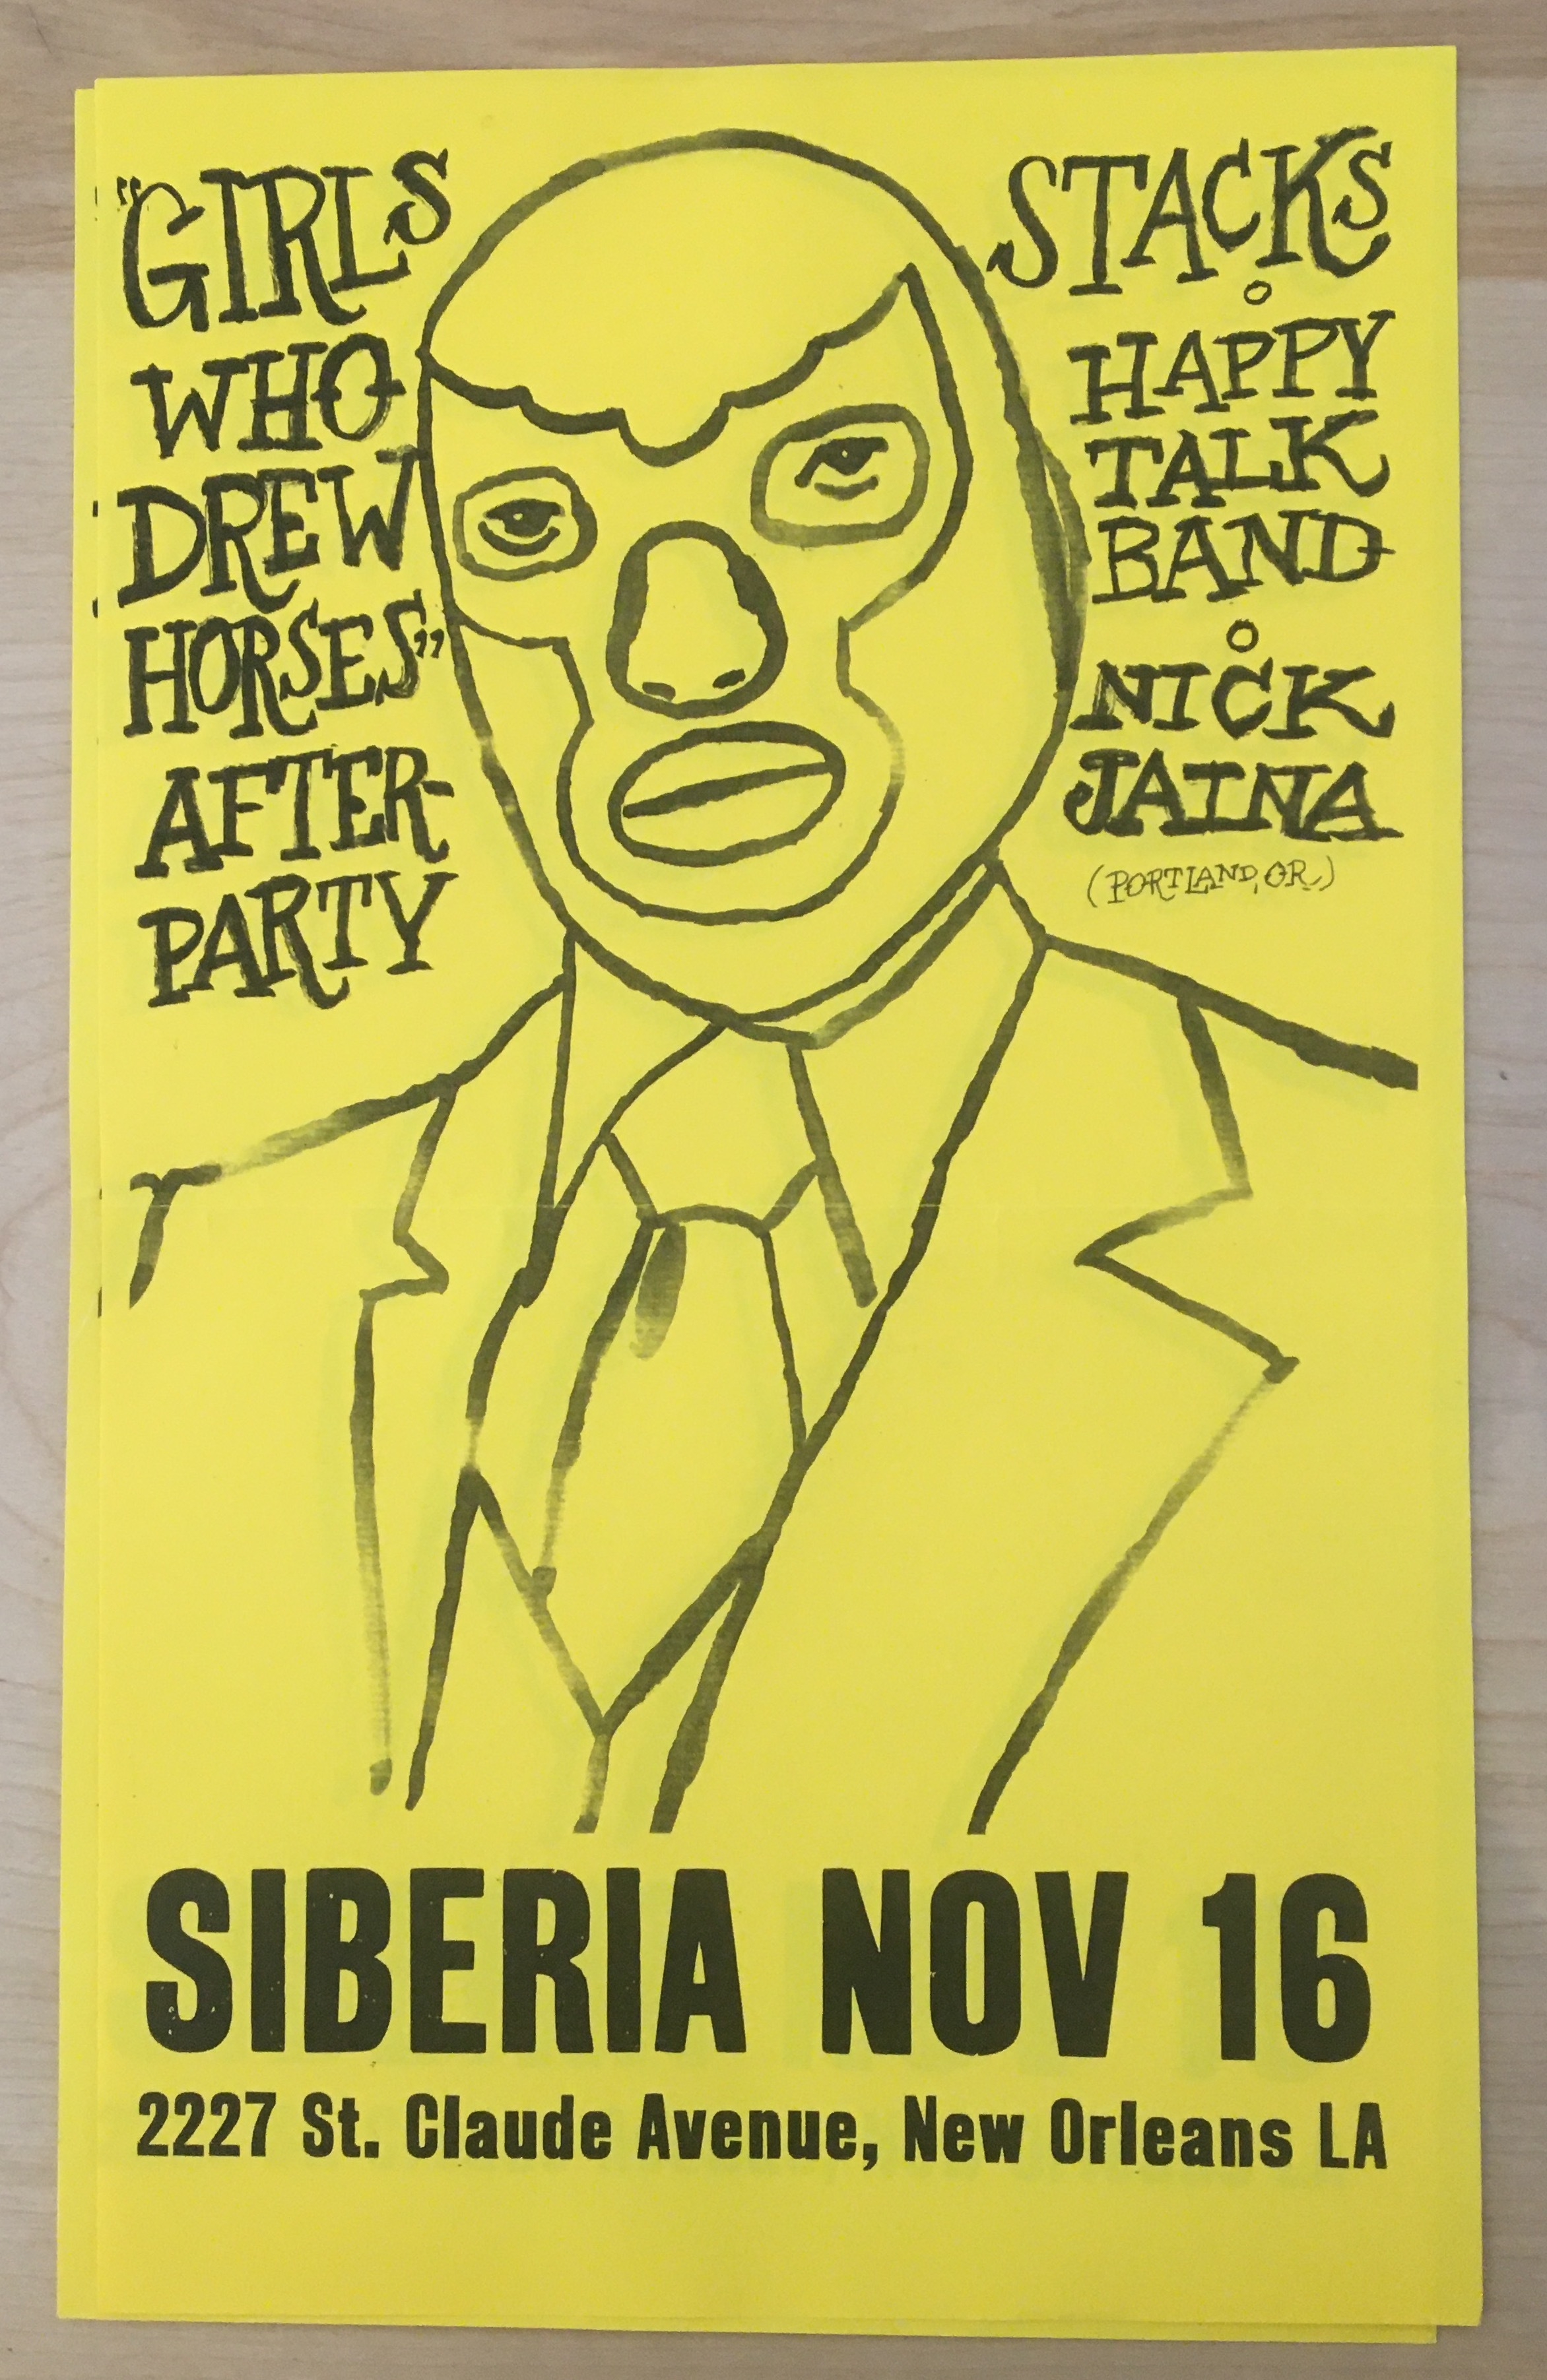 Stacks at Siberia with Happy Talk and a play flyer